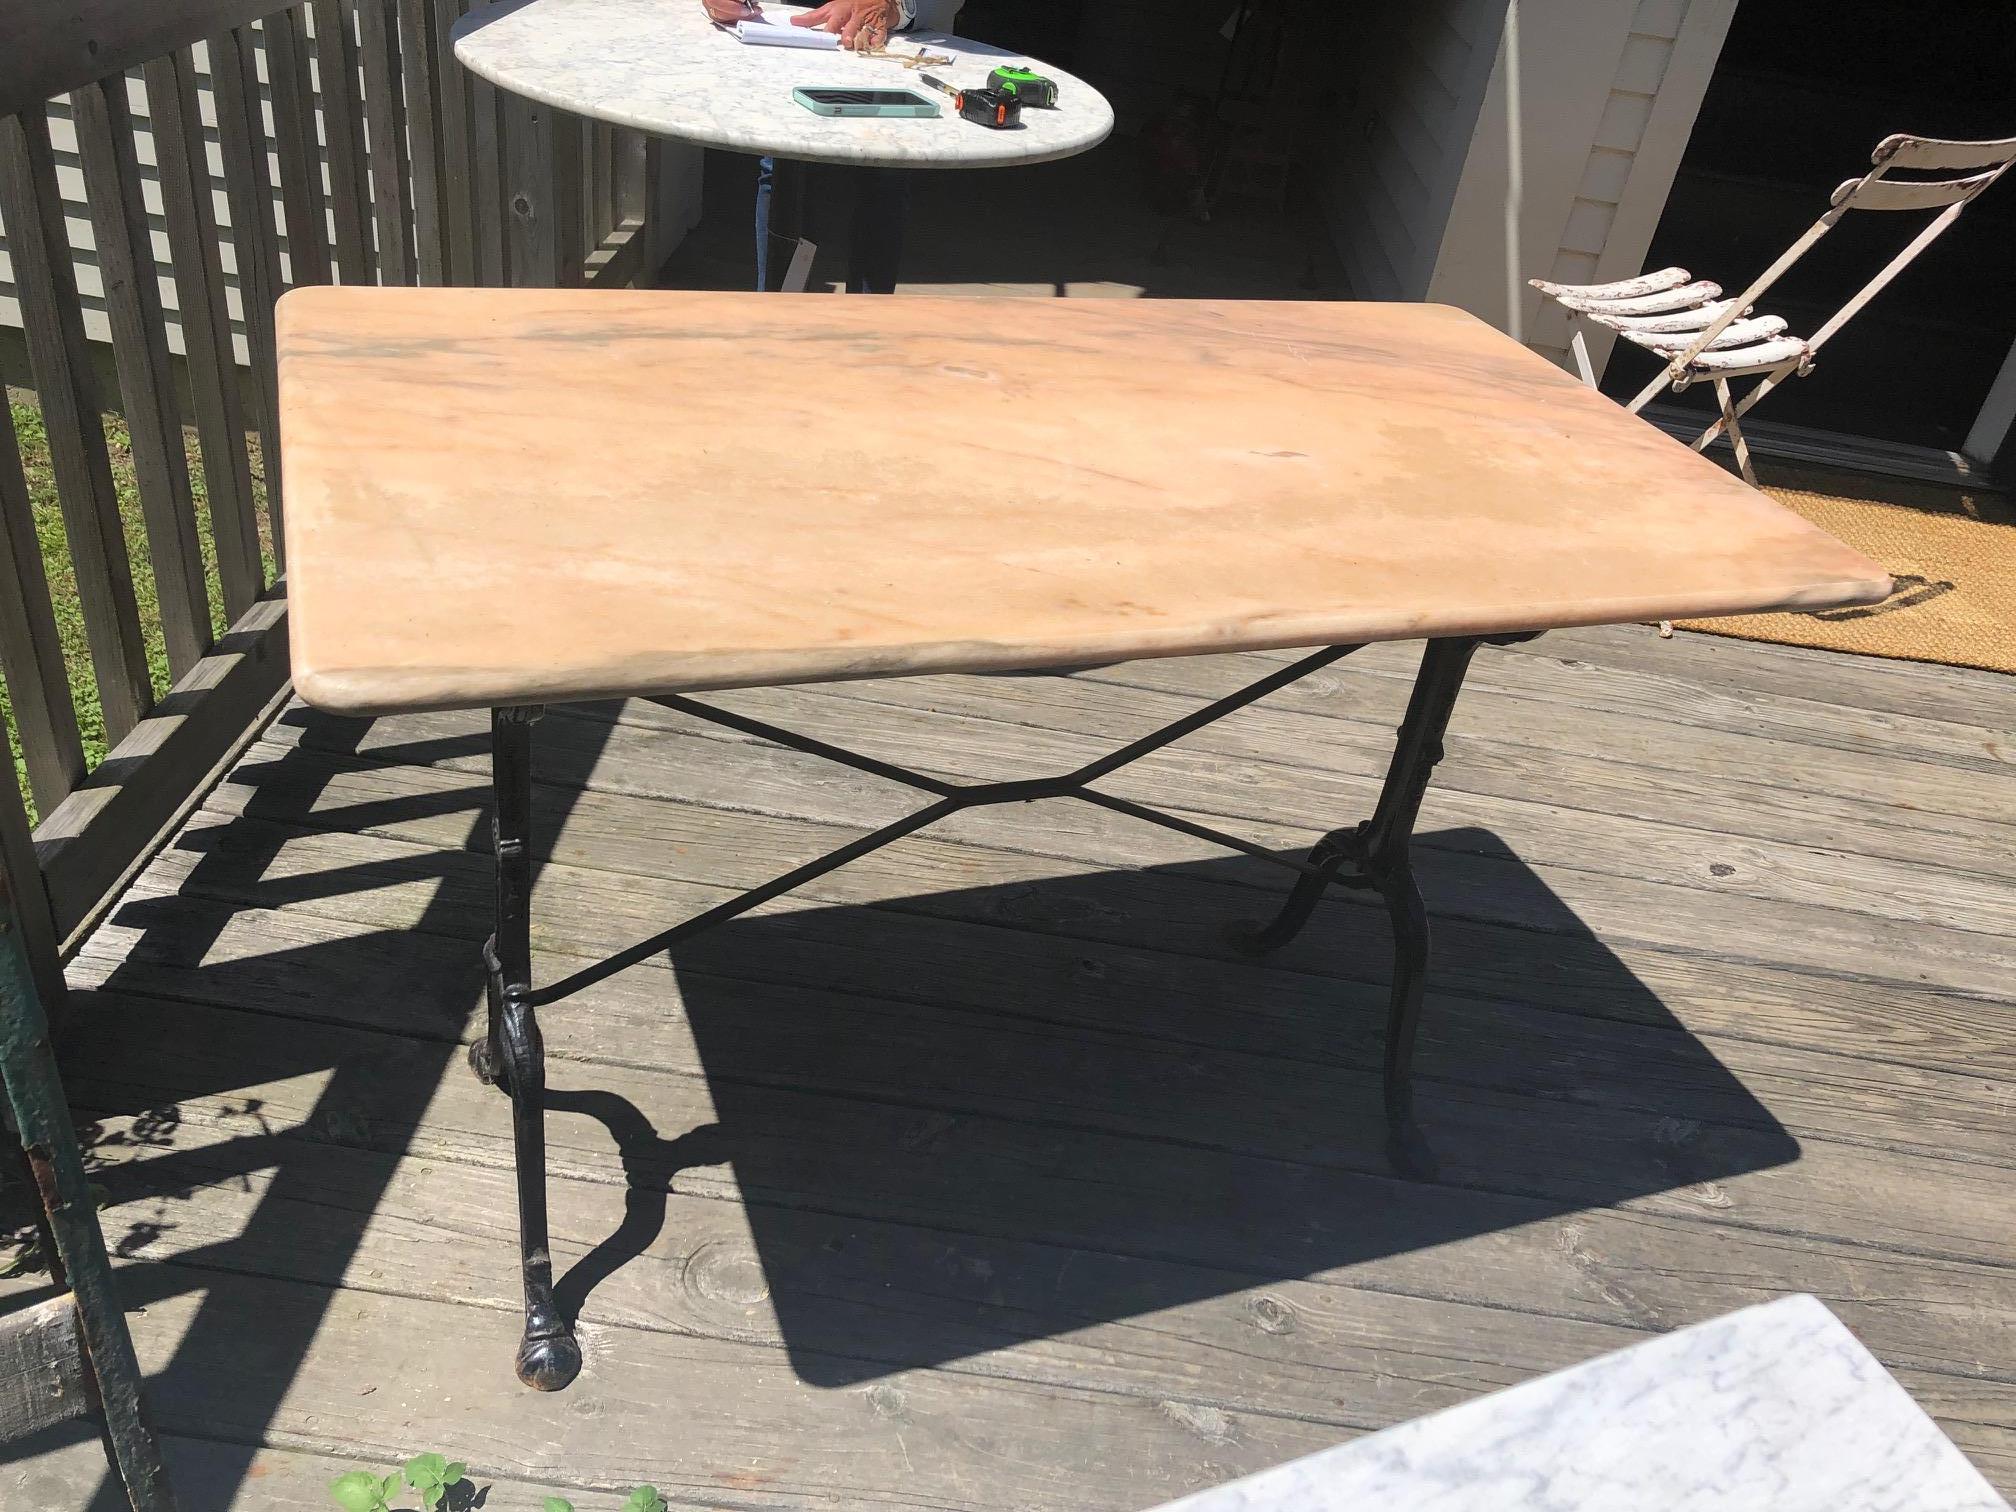 Classic French bistro table having black heavy iron base and lovely pink marble rectangular top. Perfect size as a small breakfast table or writing desk. Can be used indoors or on the patio.